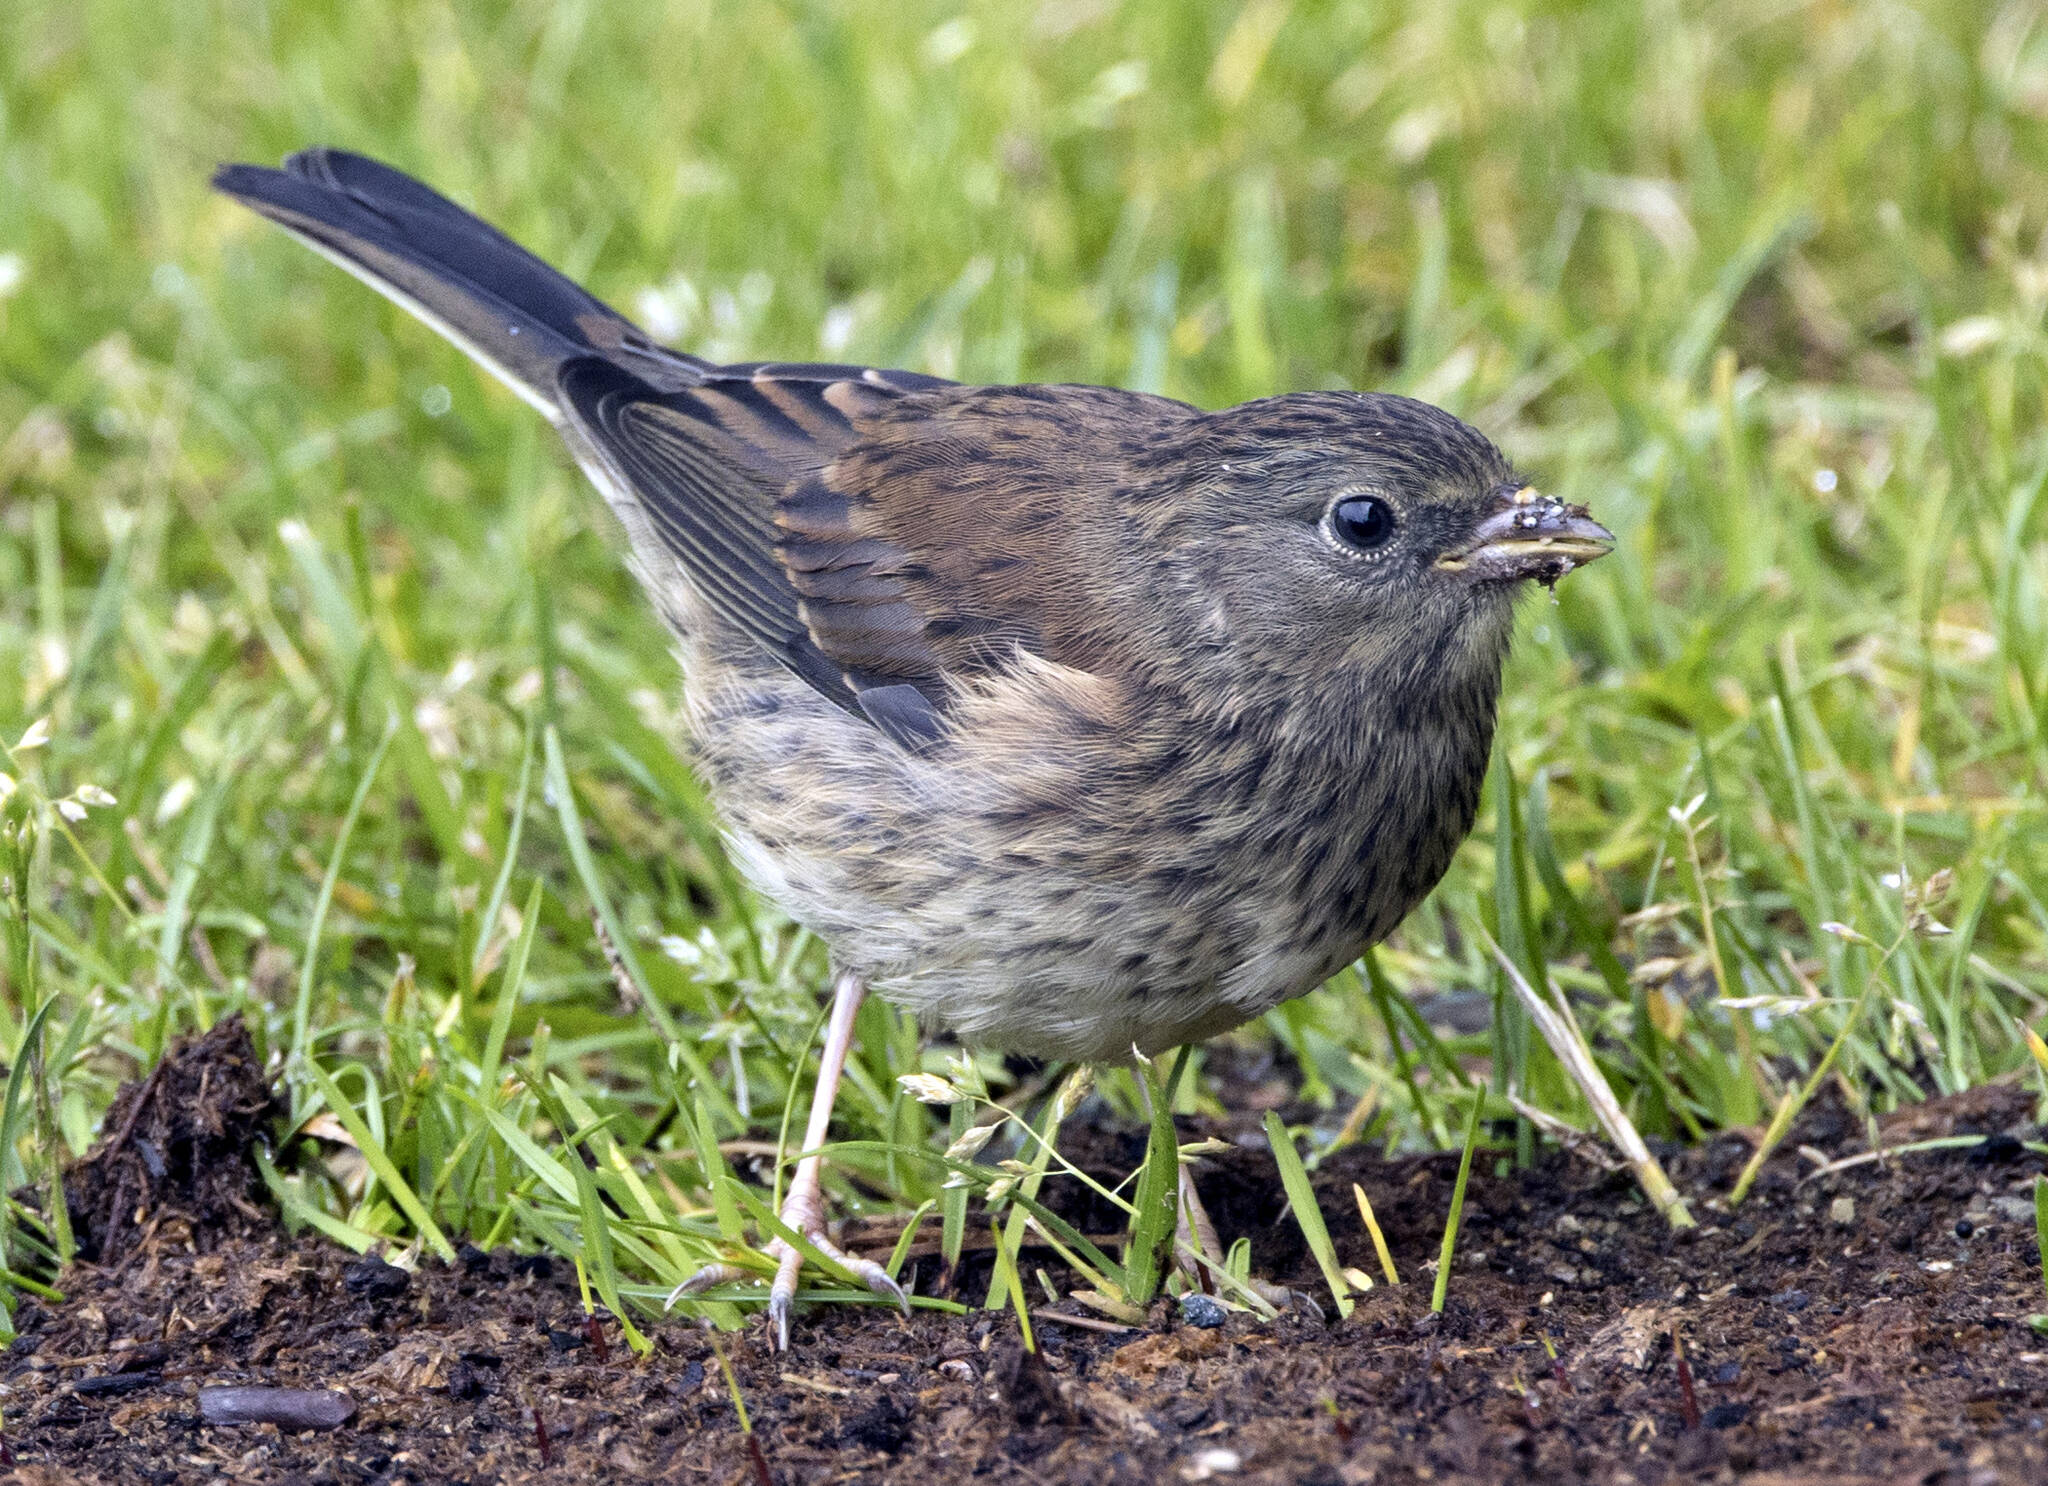 Dark-eyed Junco juvenile in a garden with new grass seedlings on July 6. (Courtesy photo / Kenneth Gill, gillfoto)